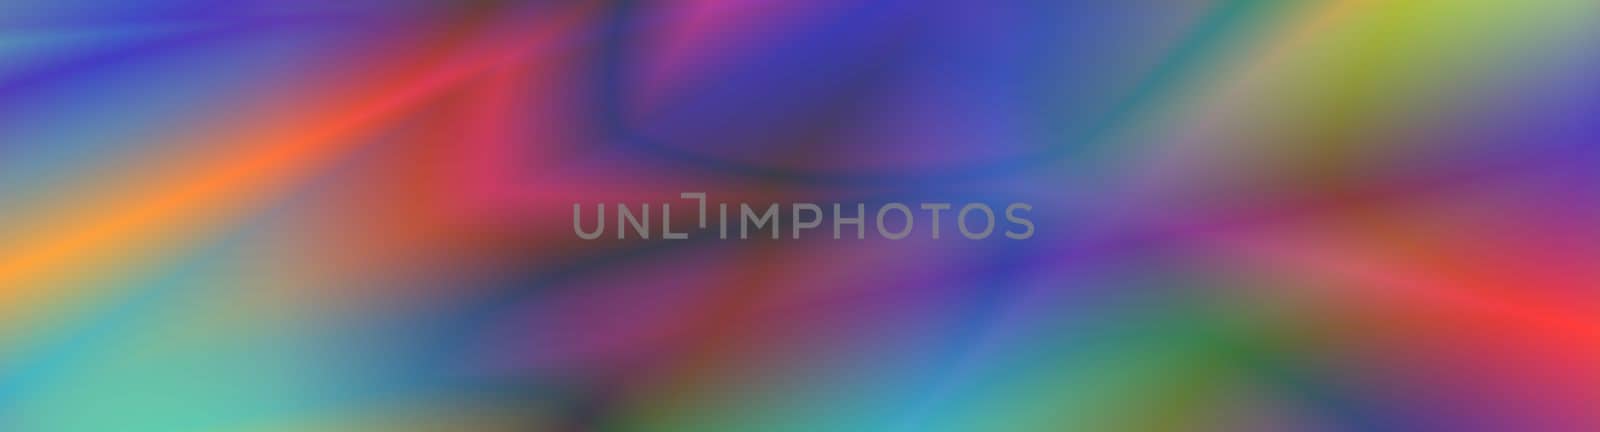 Texture for designer background. Abstract colorful background.